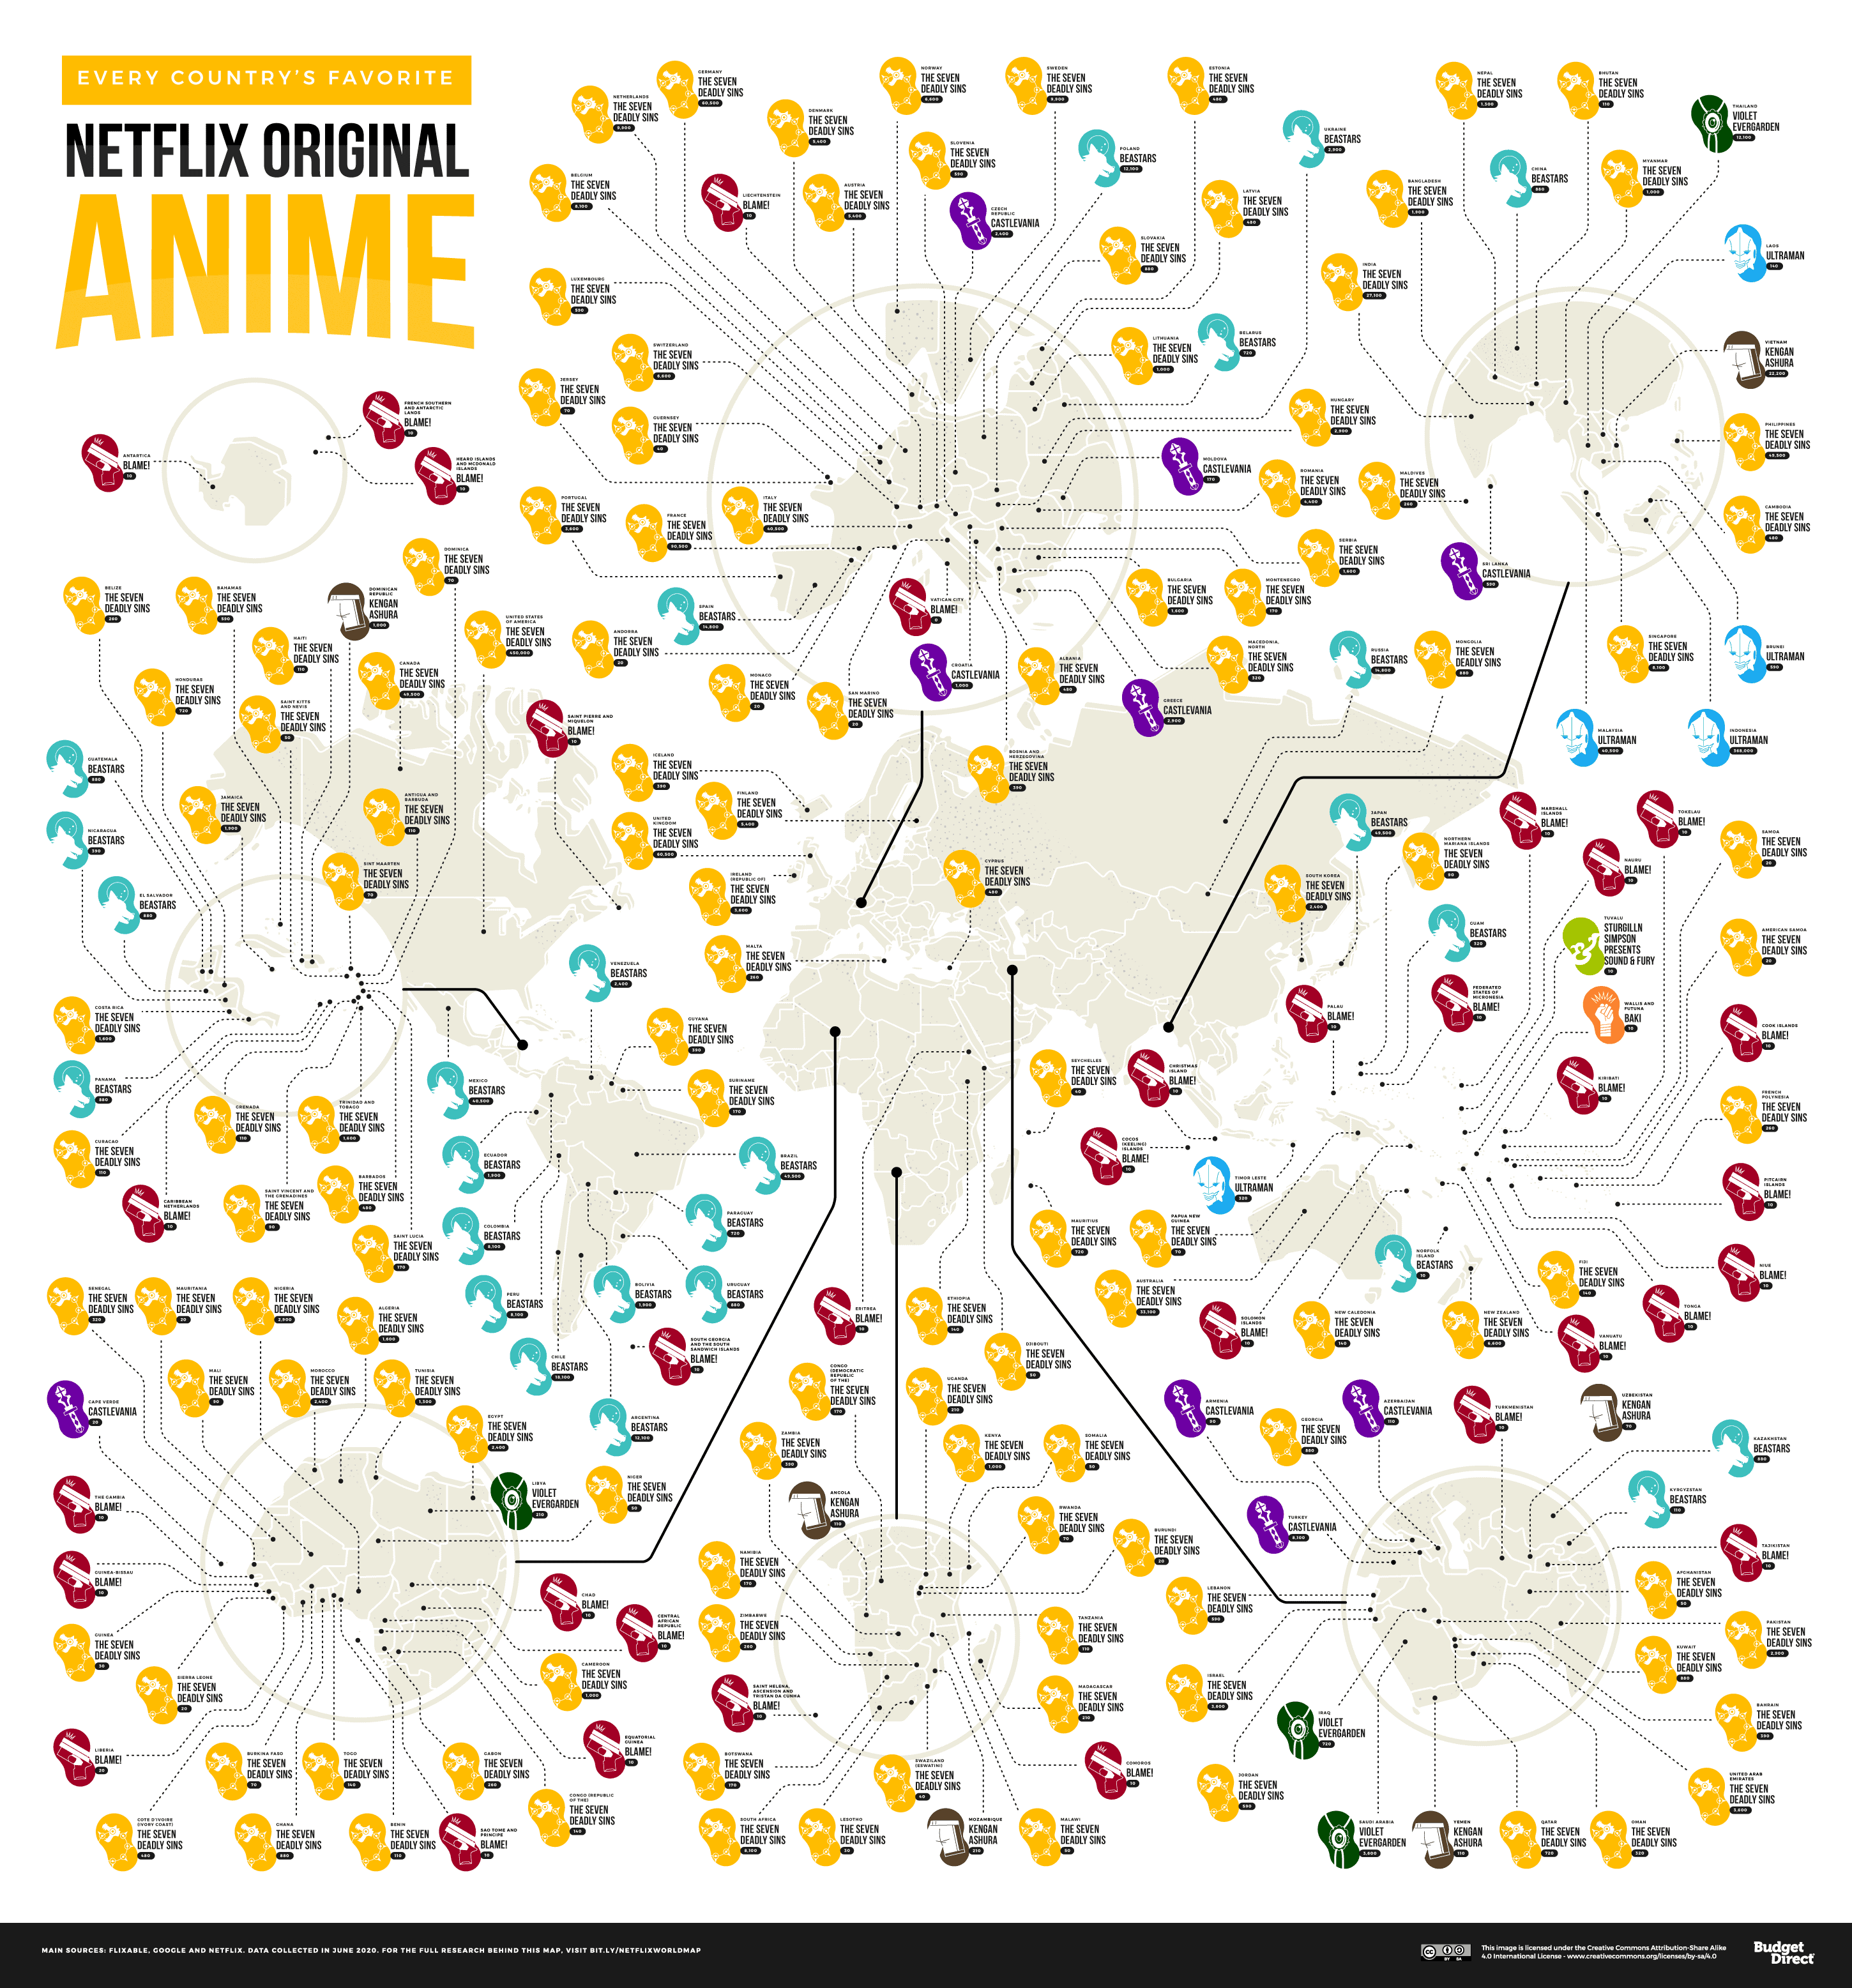 Which is the most popular Netflix original anime in each country?